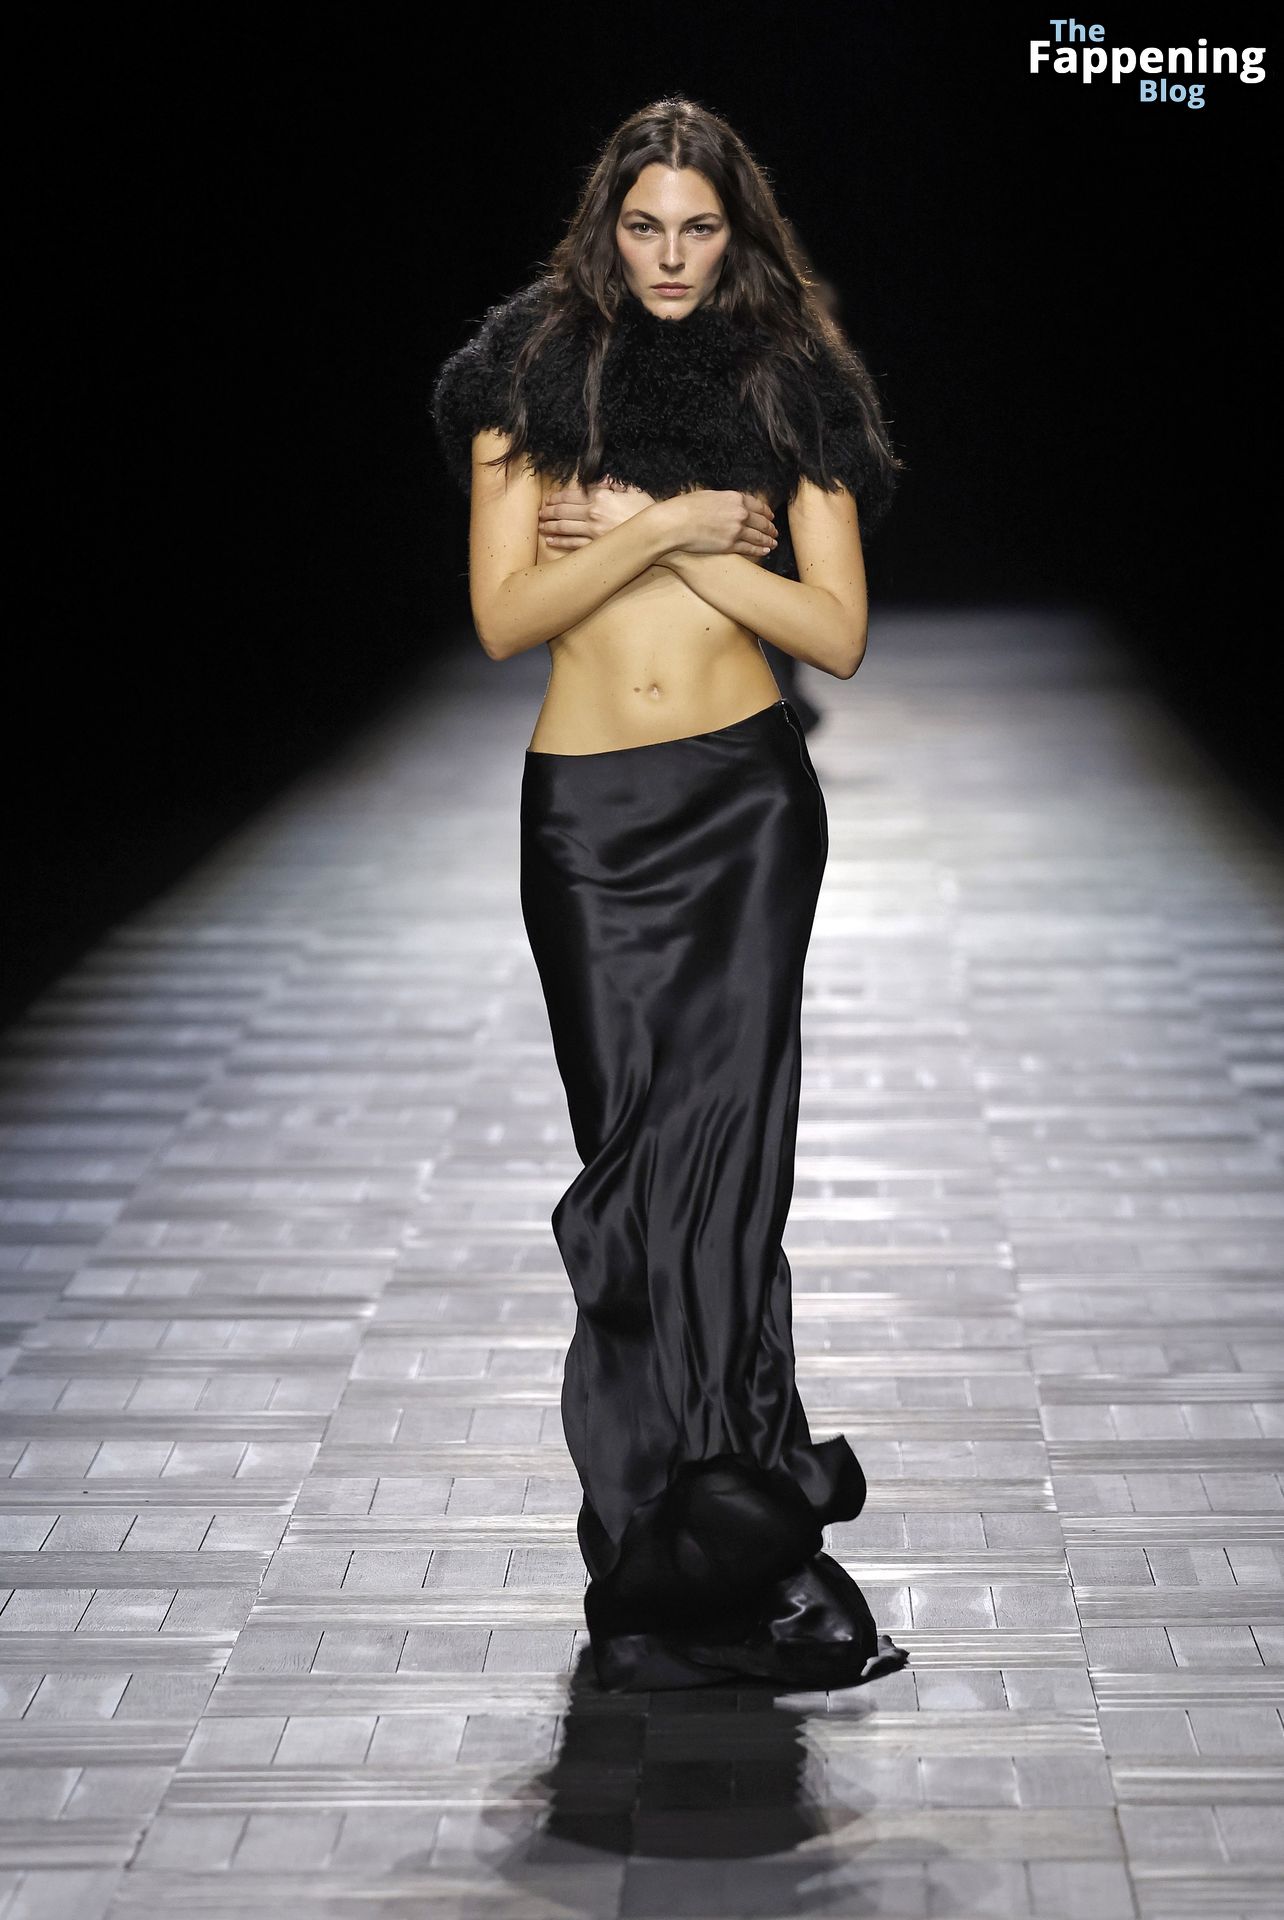 Vittoria Ceretti Walks the Runway Topless at the Ann Demeulemeester Show During Paris Fashion Week (8 Photos + Video)